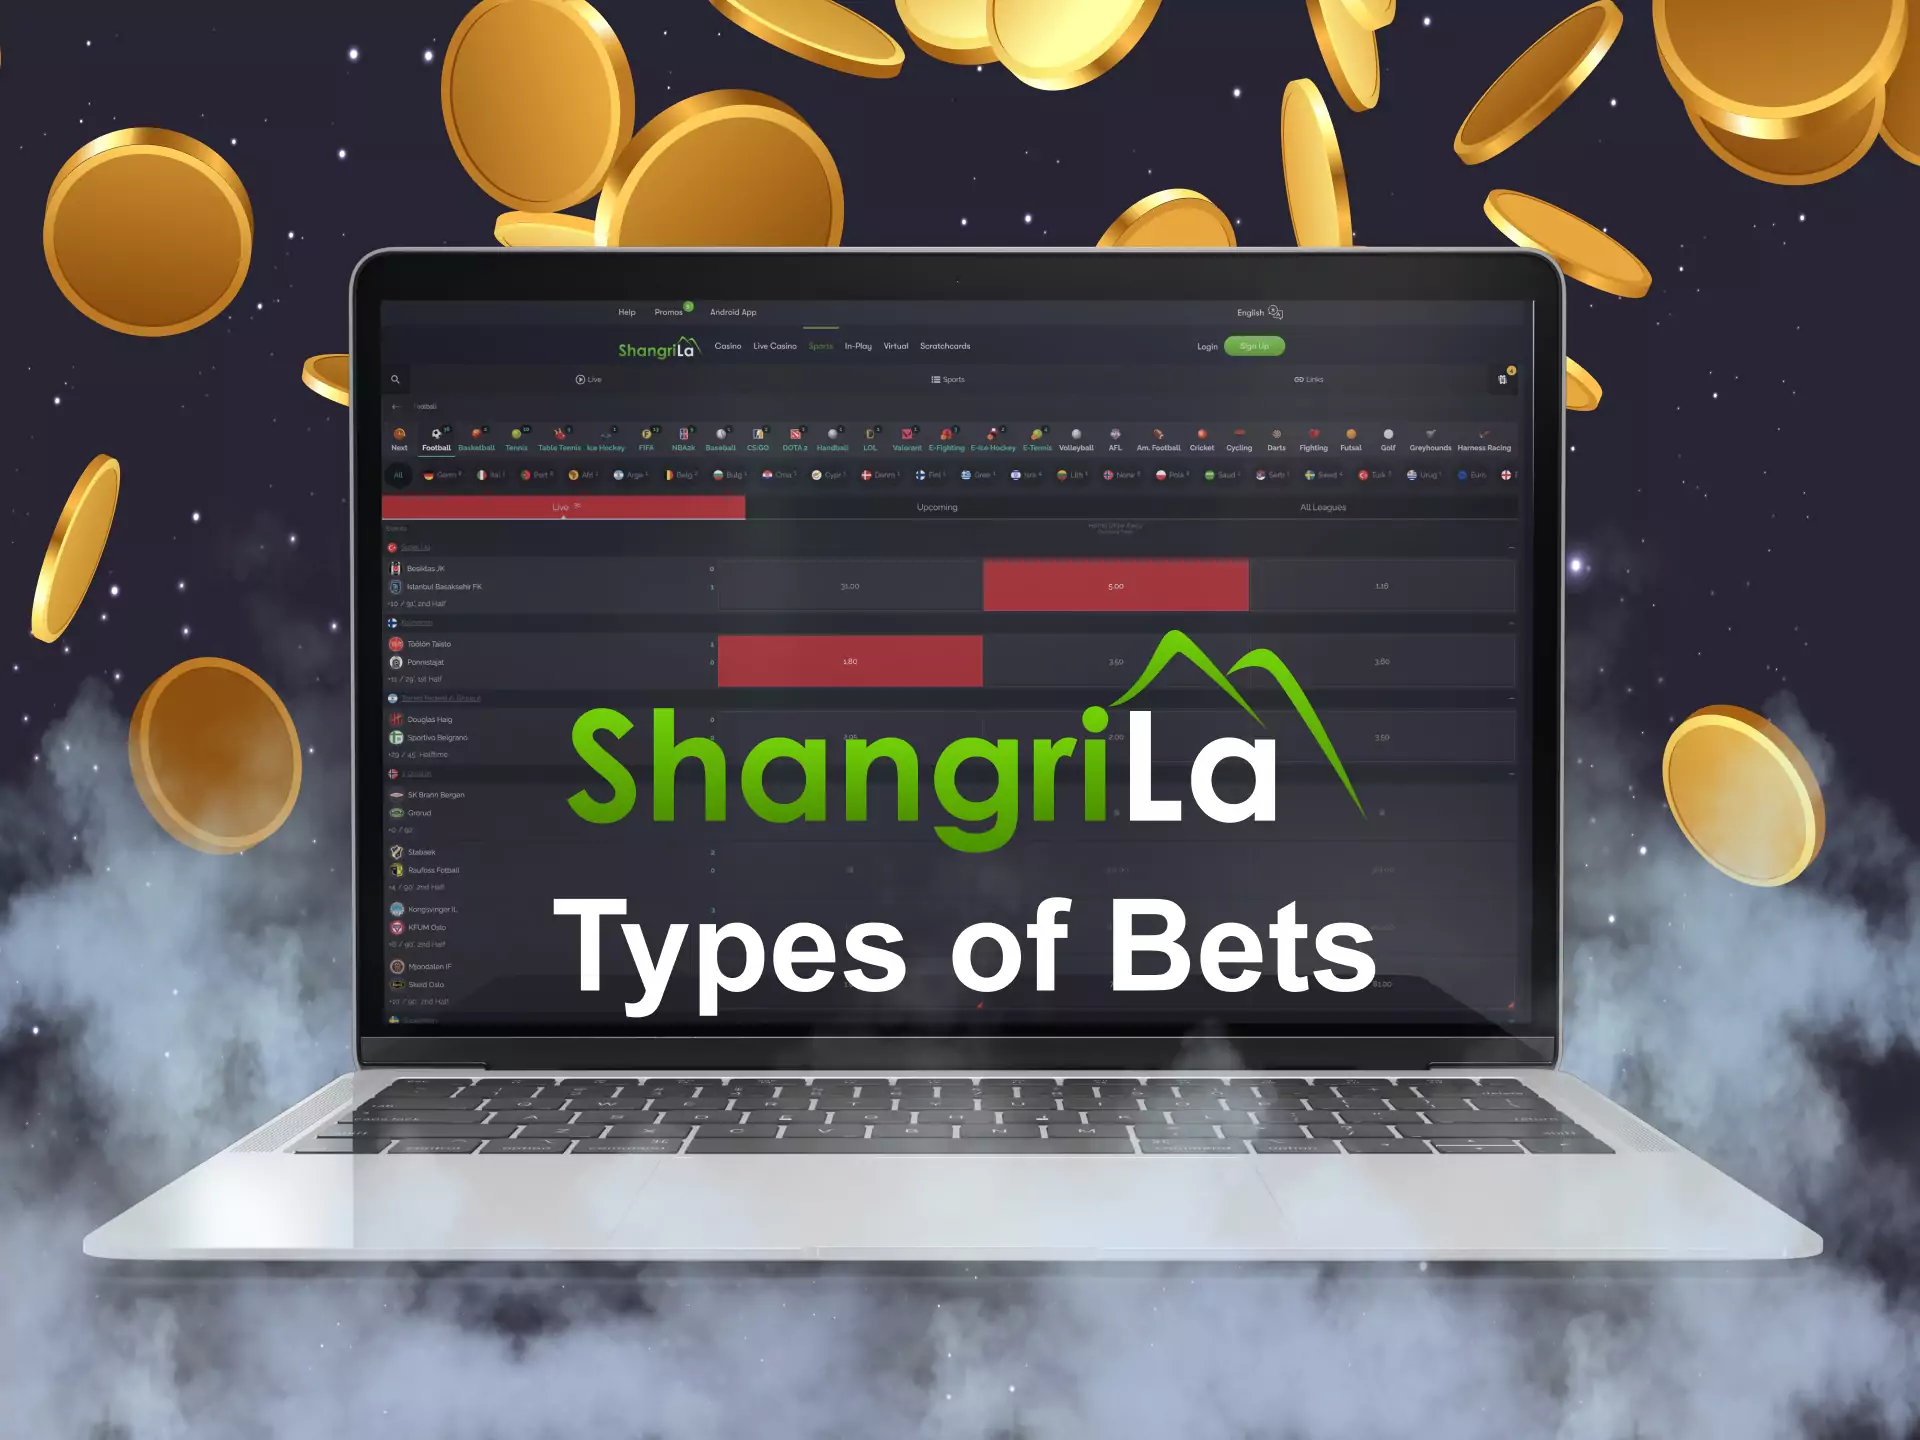 On the Shangri La website, you can place different types of bets.